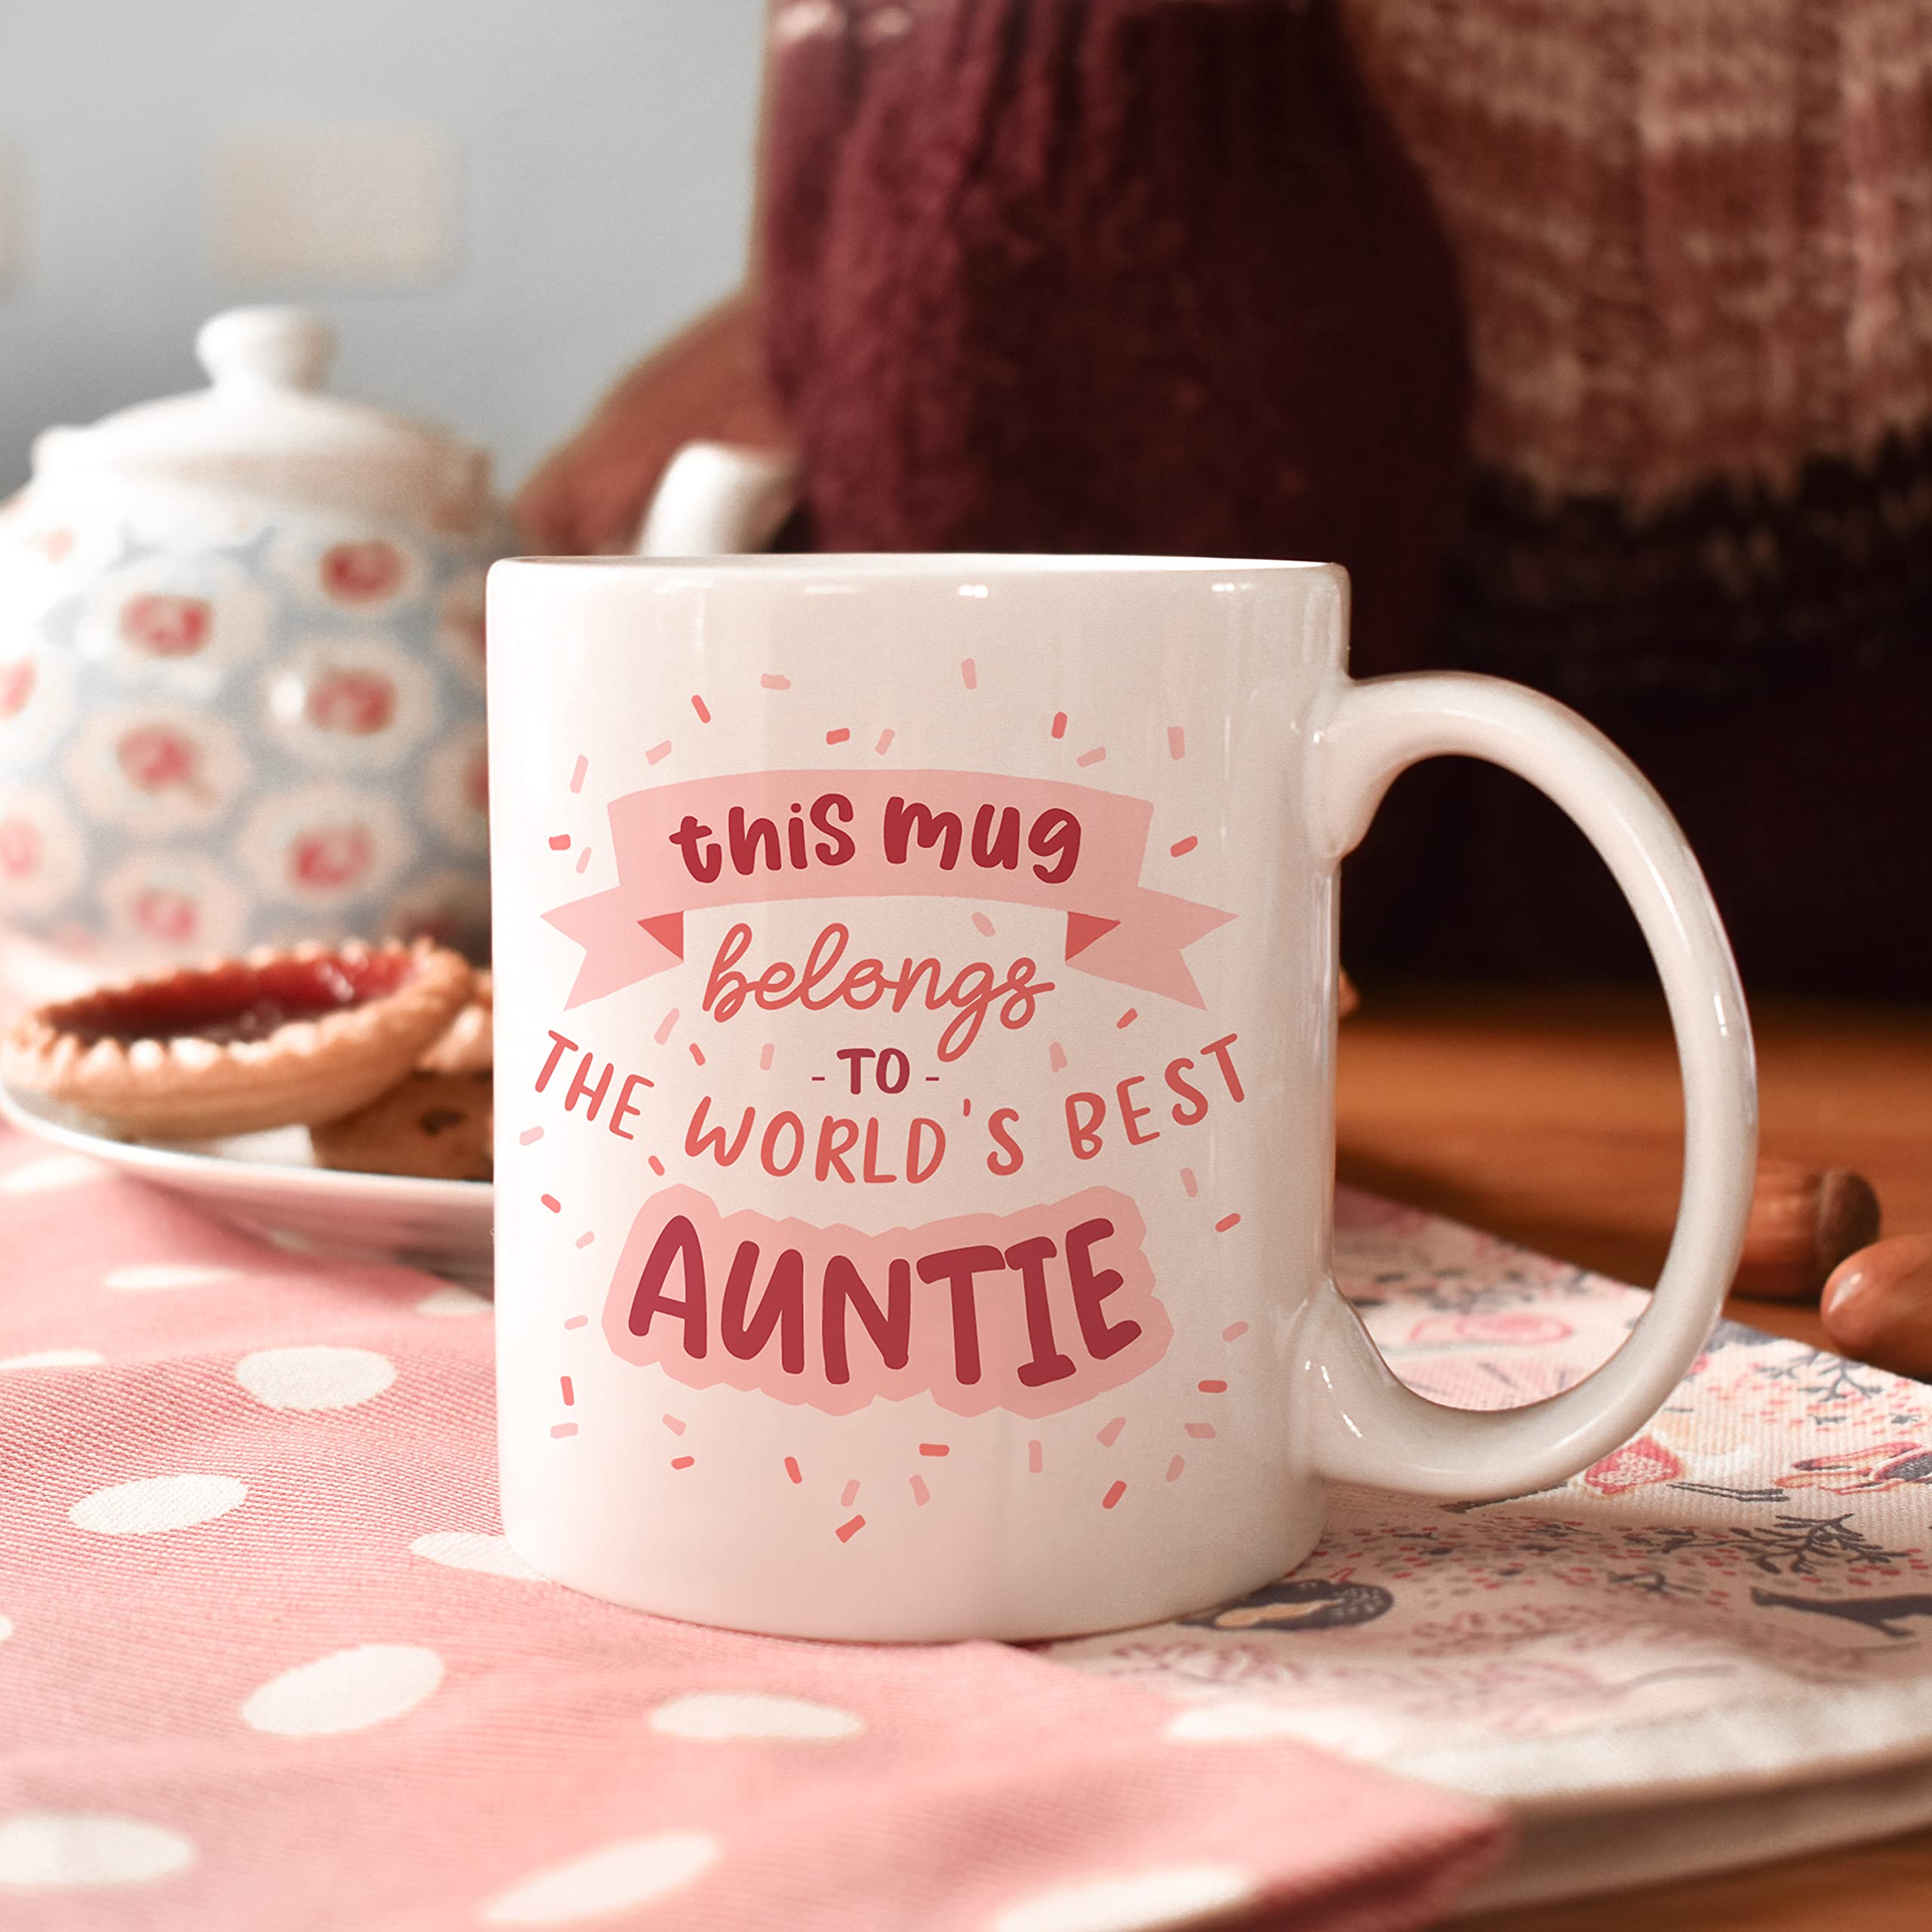 Auntie gifts mug   big sister’s birthday special gift   presents for christmas xmas   from in law brother   brothers womens   aunt aunty long distance friend   sentimental amazing mugs uk